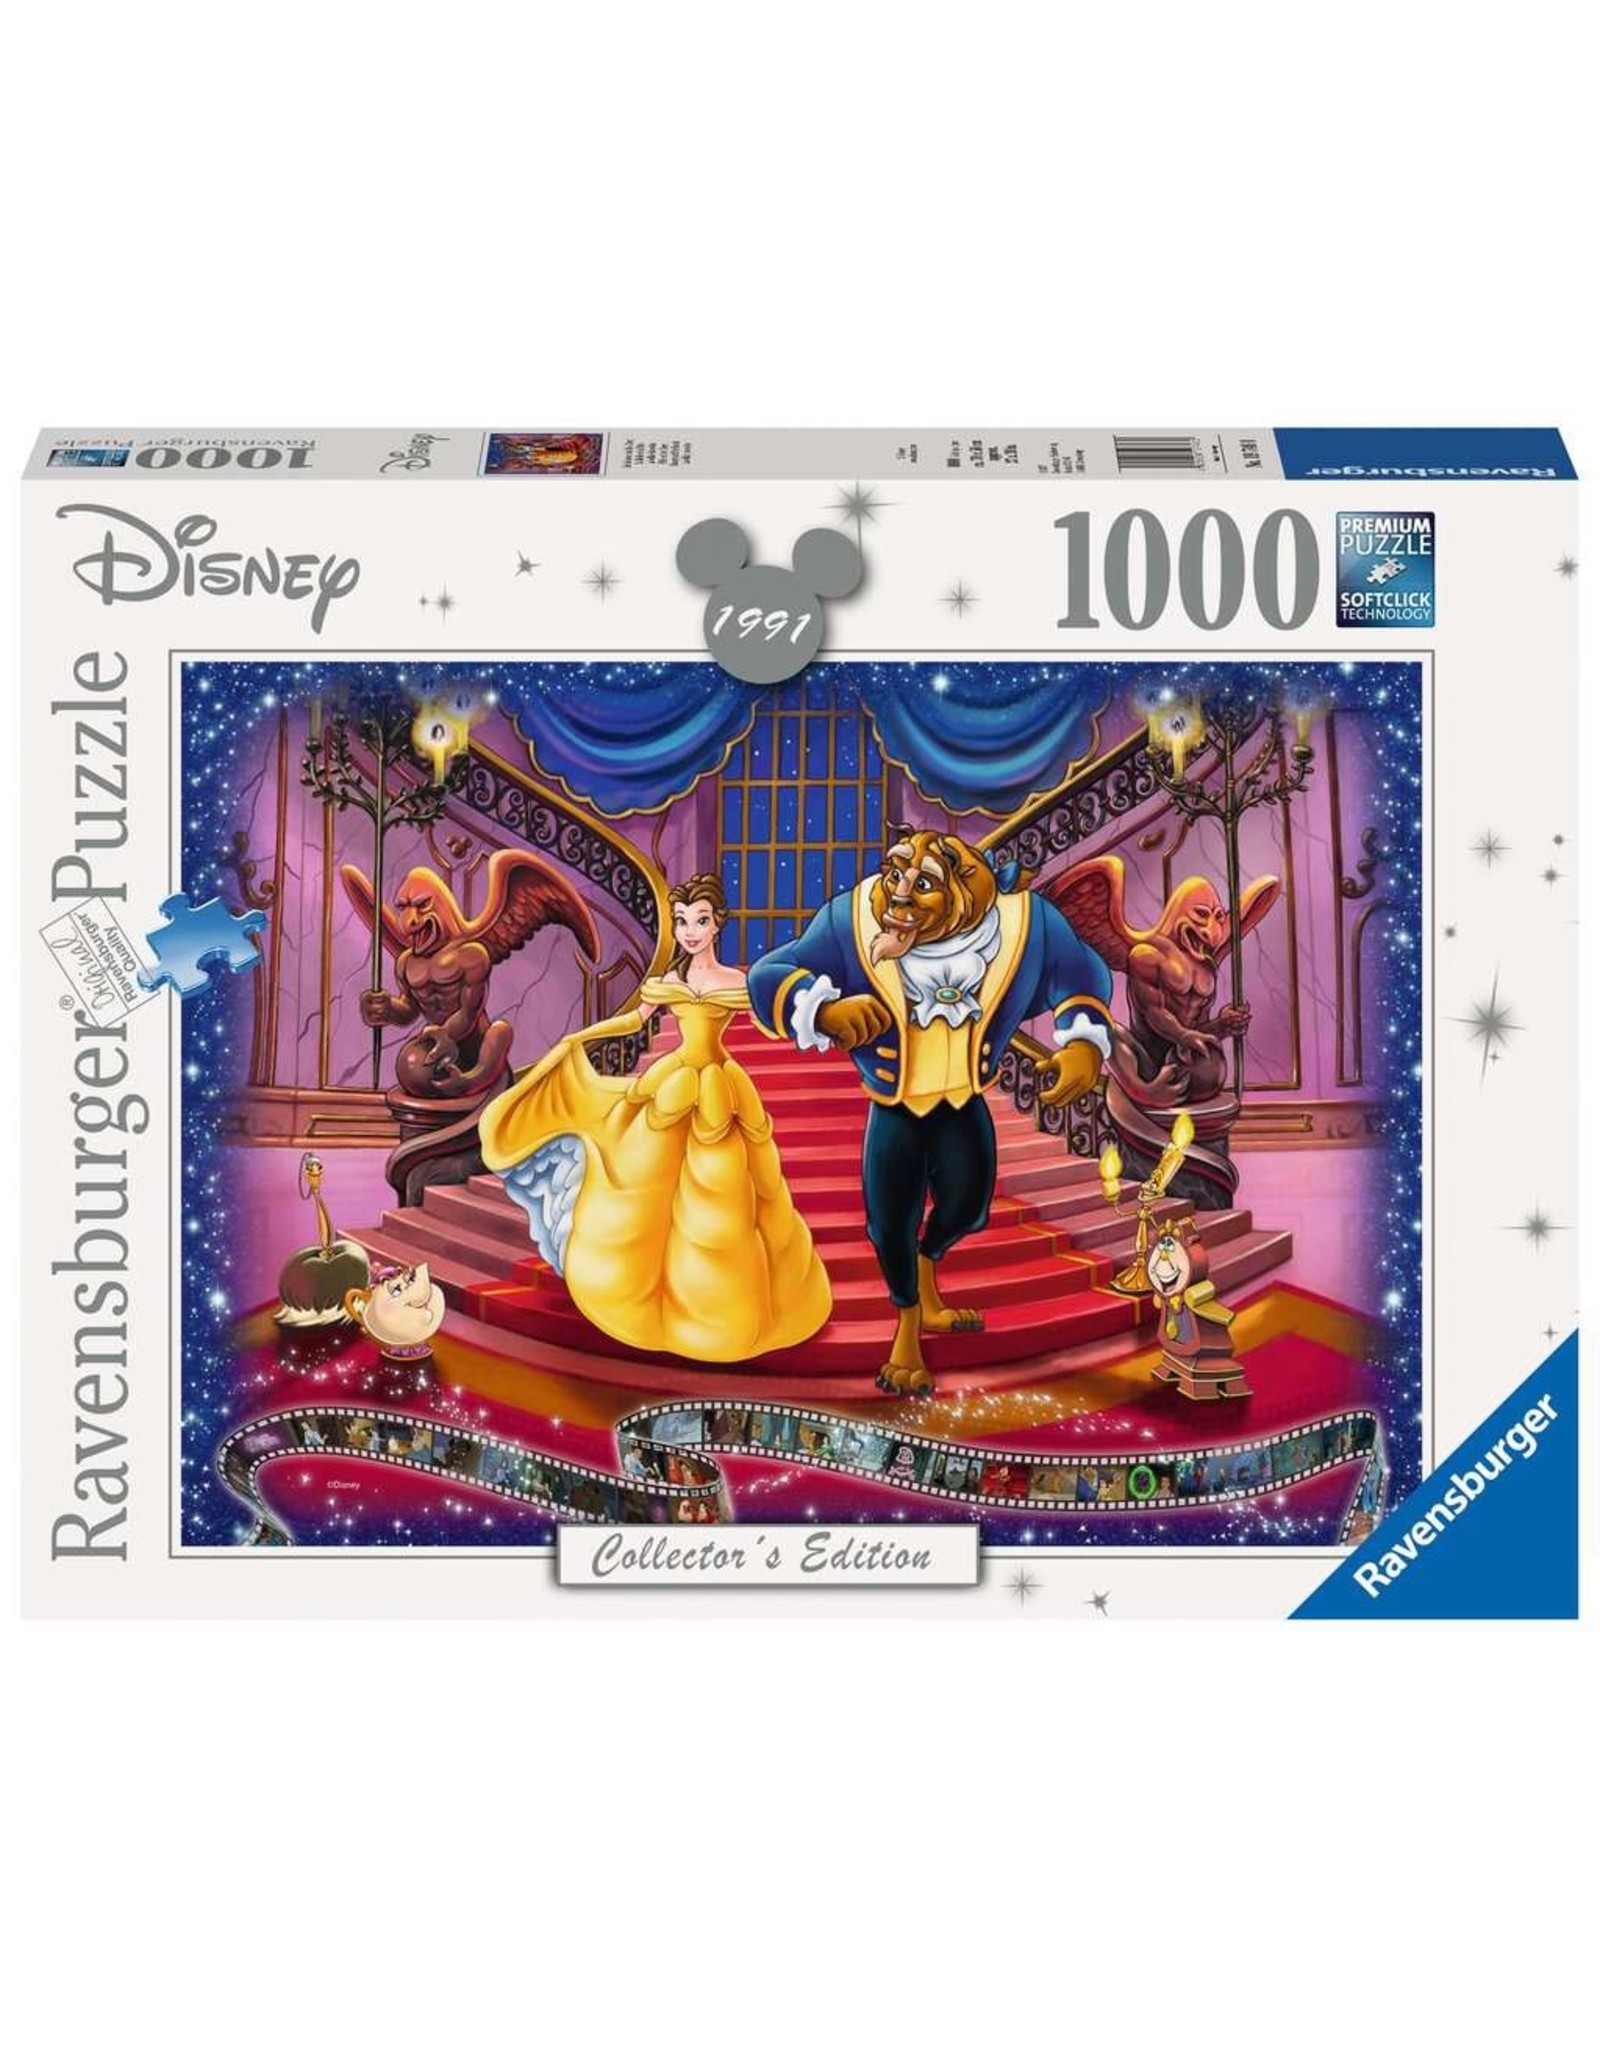 Ravensburger Beauty and the Beast 1000 Piece Puzzle